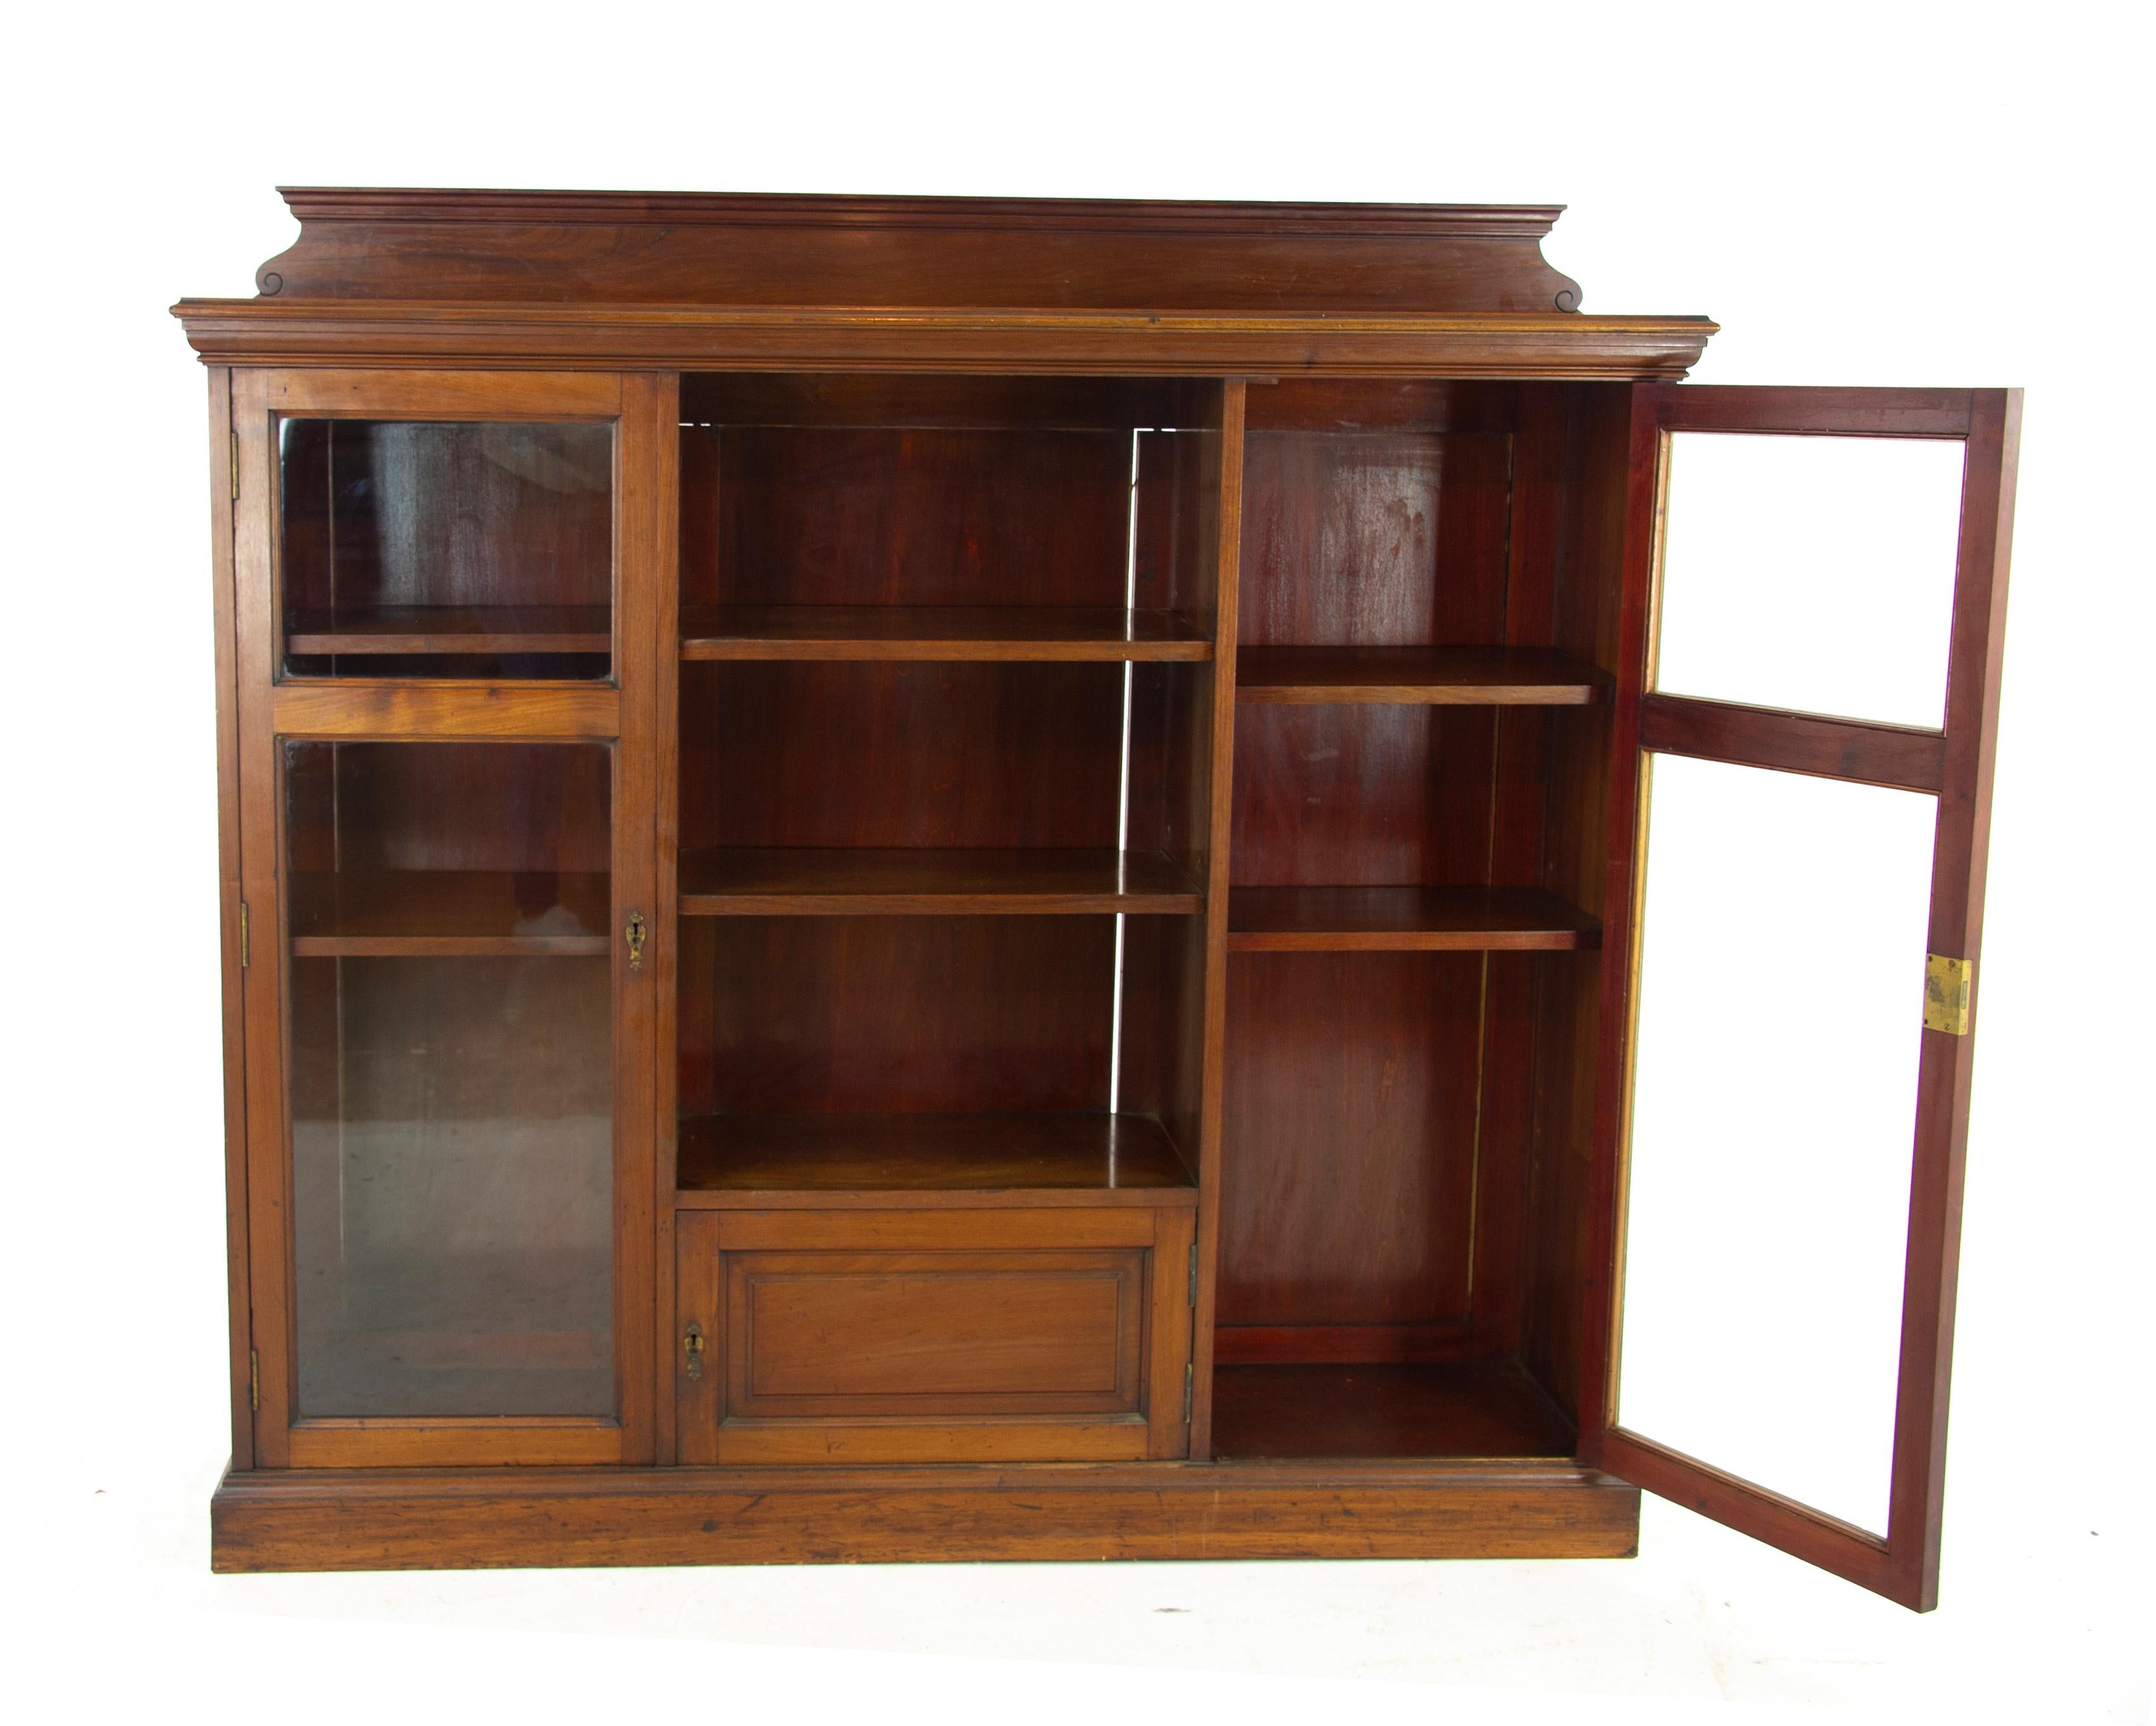 Antique walnut bookcase, walnut display cabinet, Victorian bookcase, Scotland 1890, Antique Furniture, B1164A

Scotland 1890
Solid walnut with original finish
Pediment above
Molded rectangular top
Open cupboard below with two adjustable